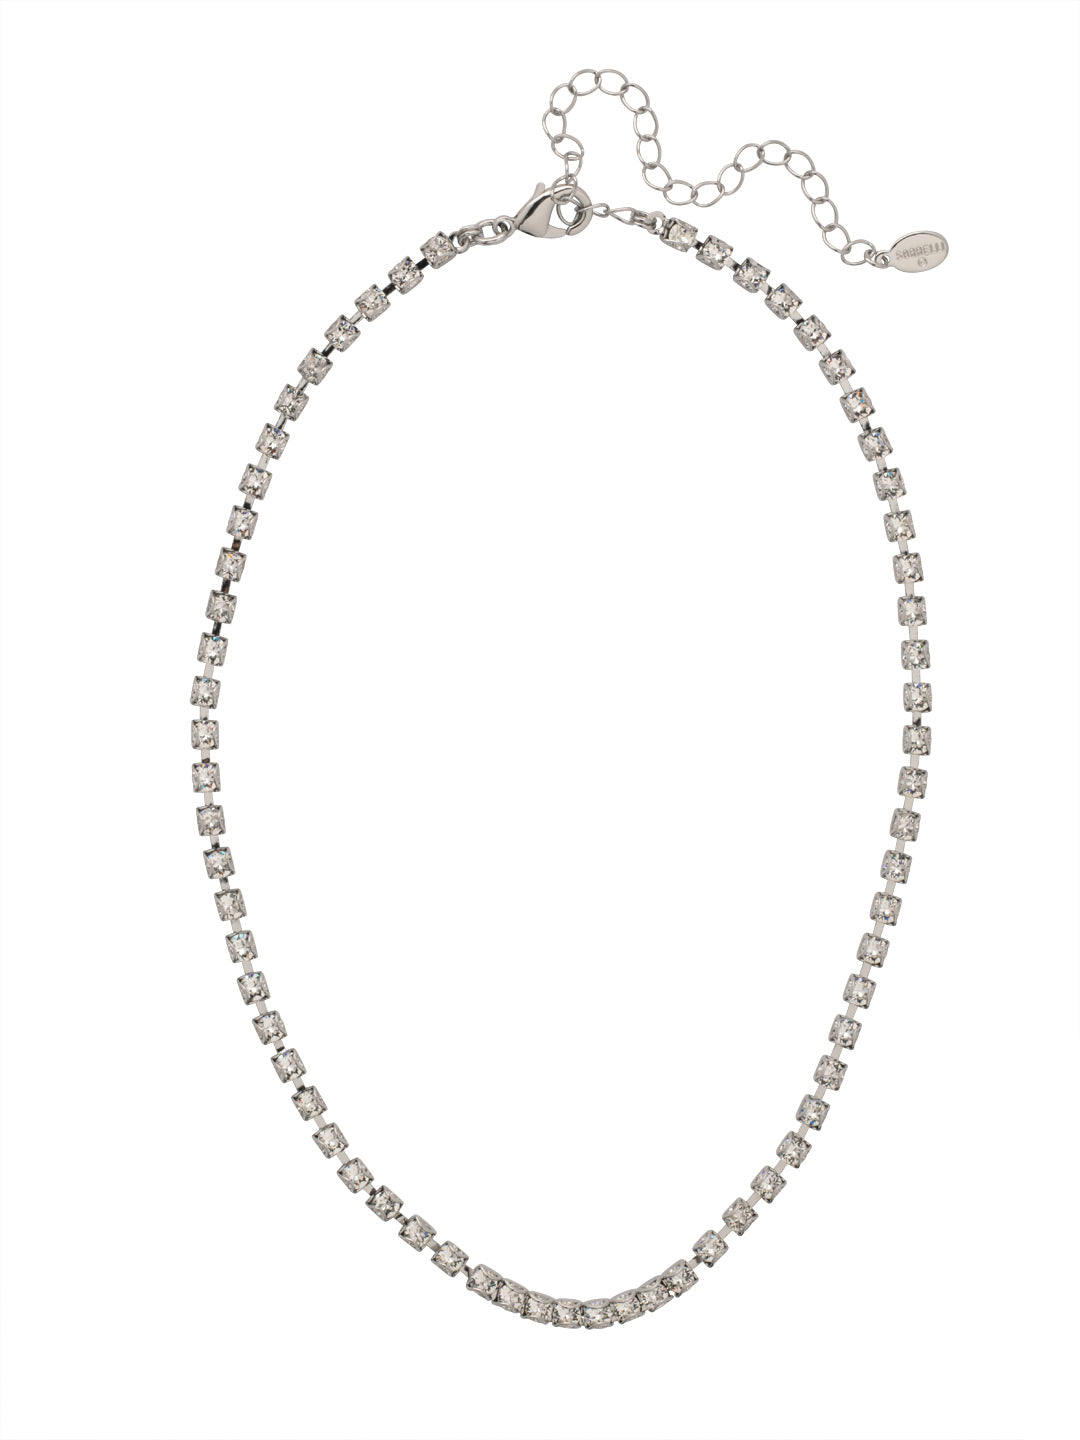 Marnie Tennis Necklace - NFA2PDCRY - <p>Perfect for dressing up or down, the classic Marnie Tennis Necklace features a repeating line of crystals secured by a lobster claw clasp. From Sorrelli's Crystal collection in our Palladium finish.</p>